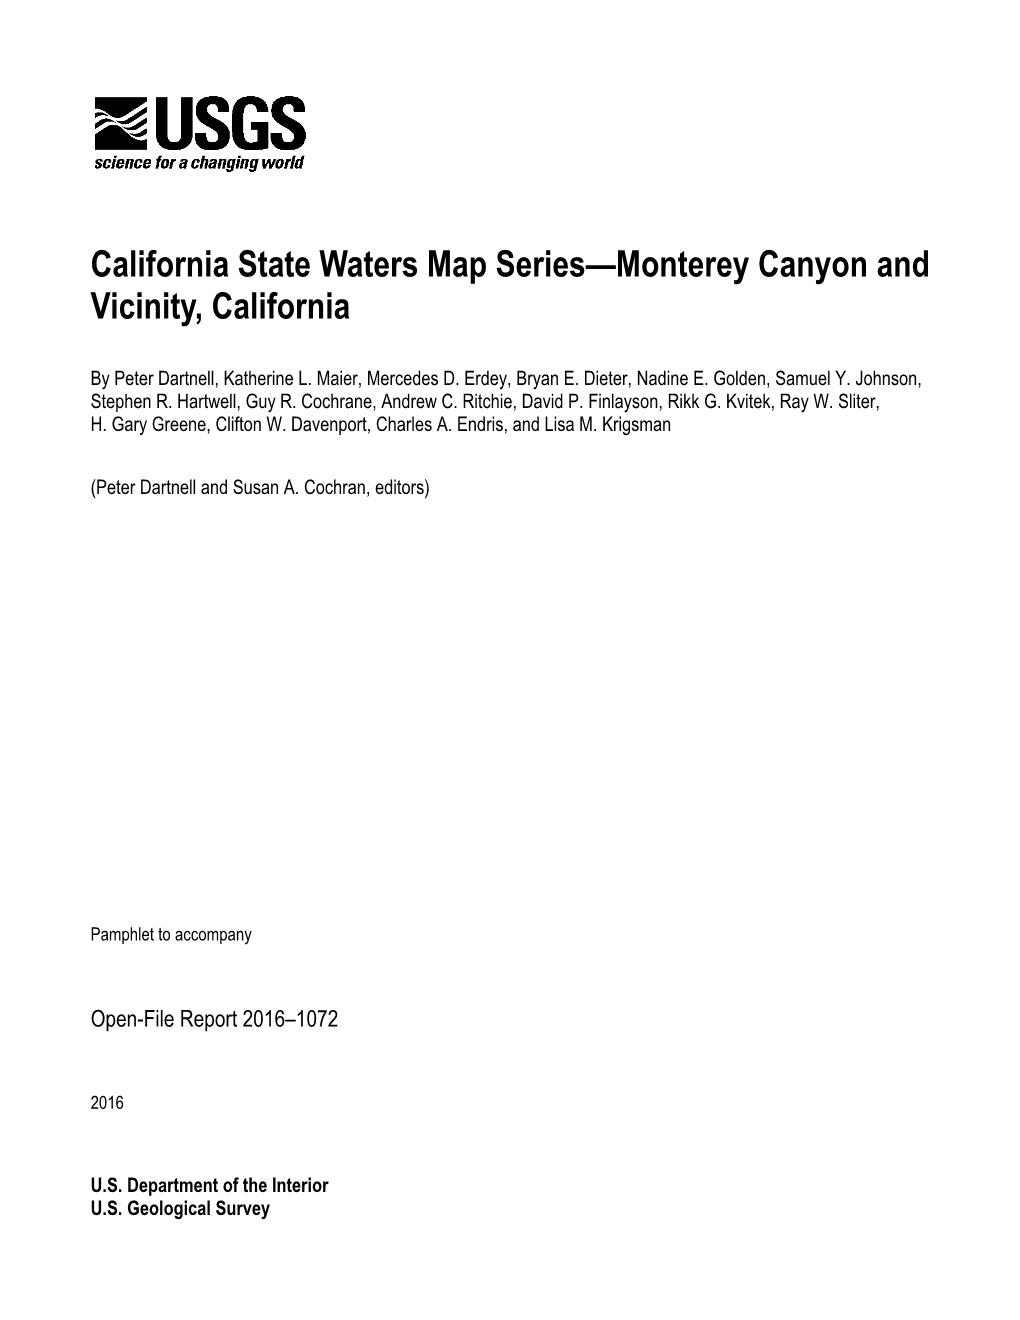 California State Waters Map Series—Monterey Canyon and Vicinity, California